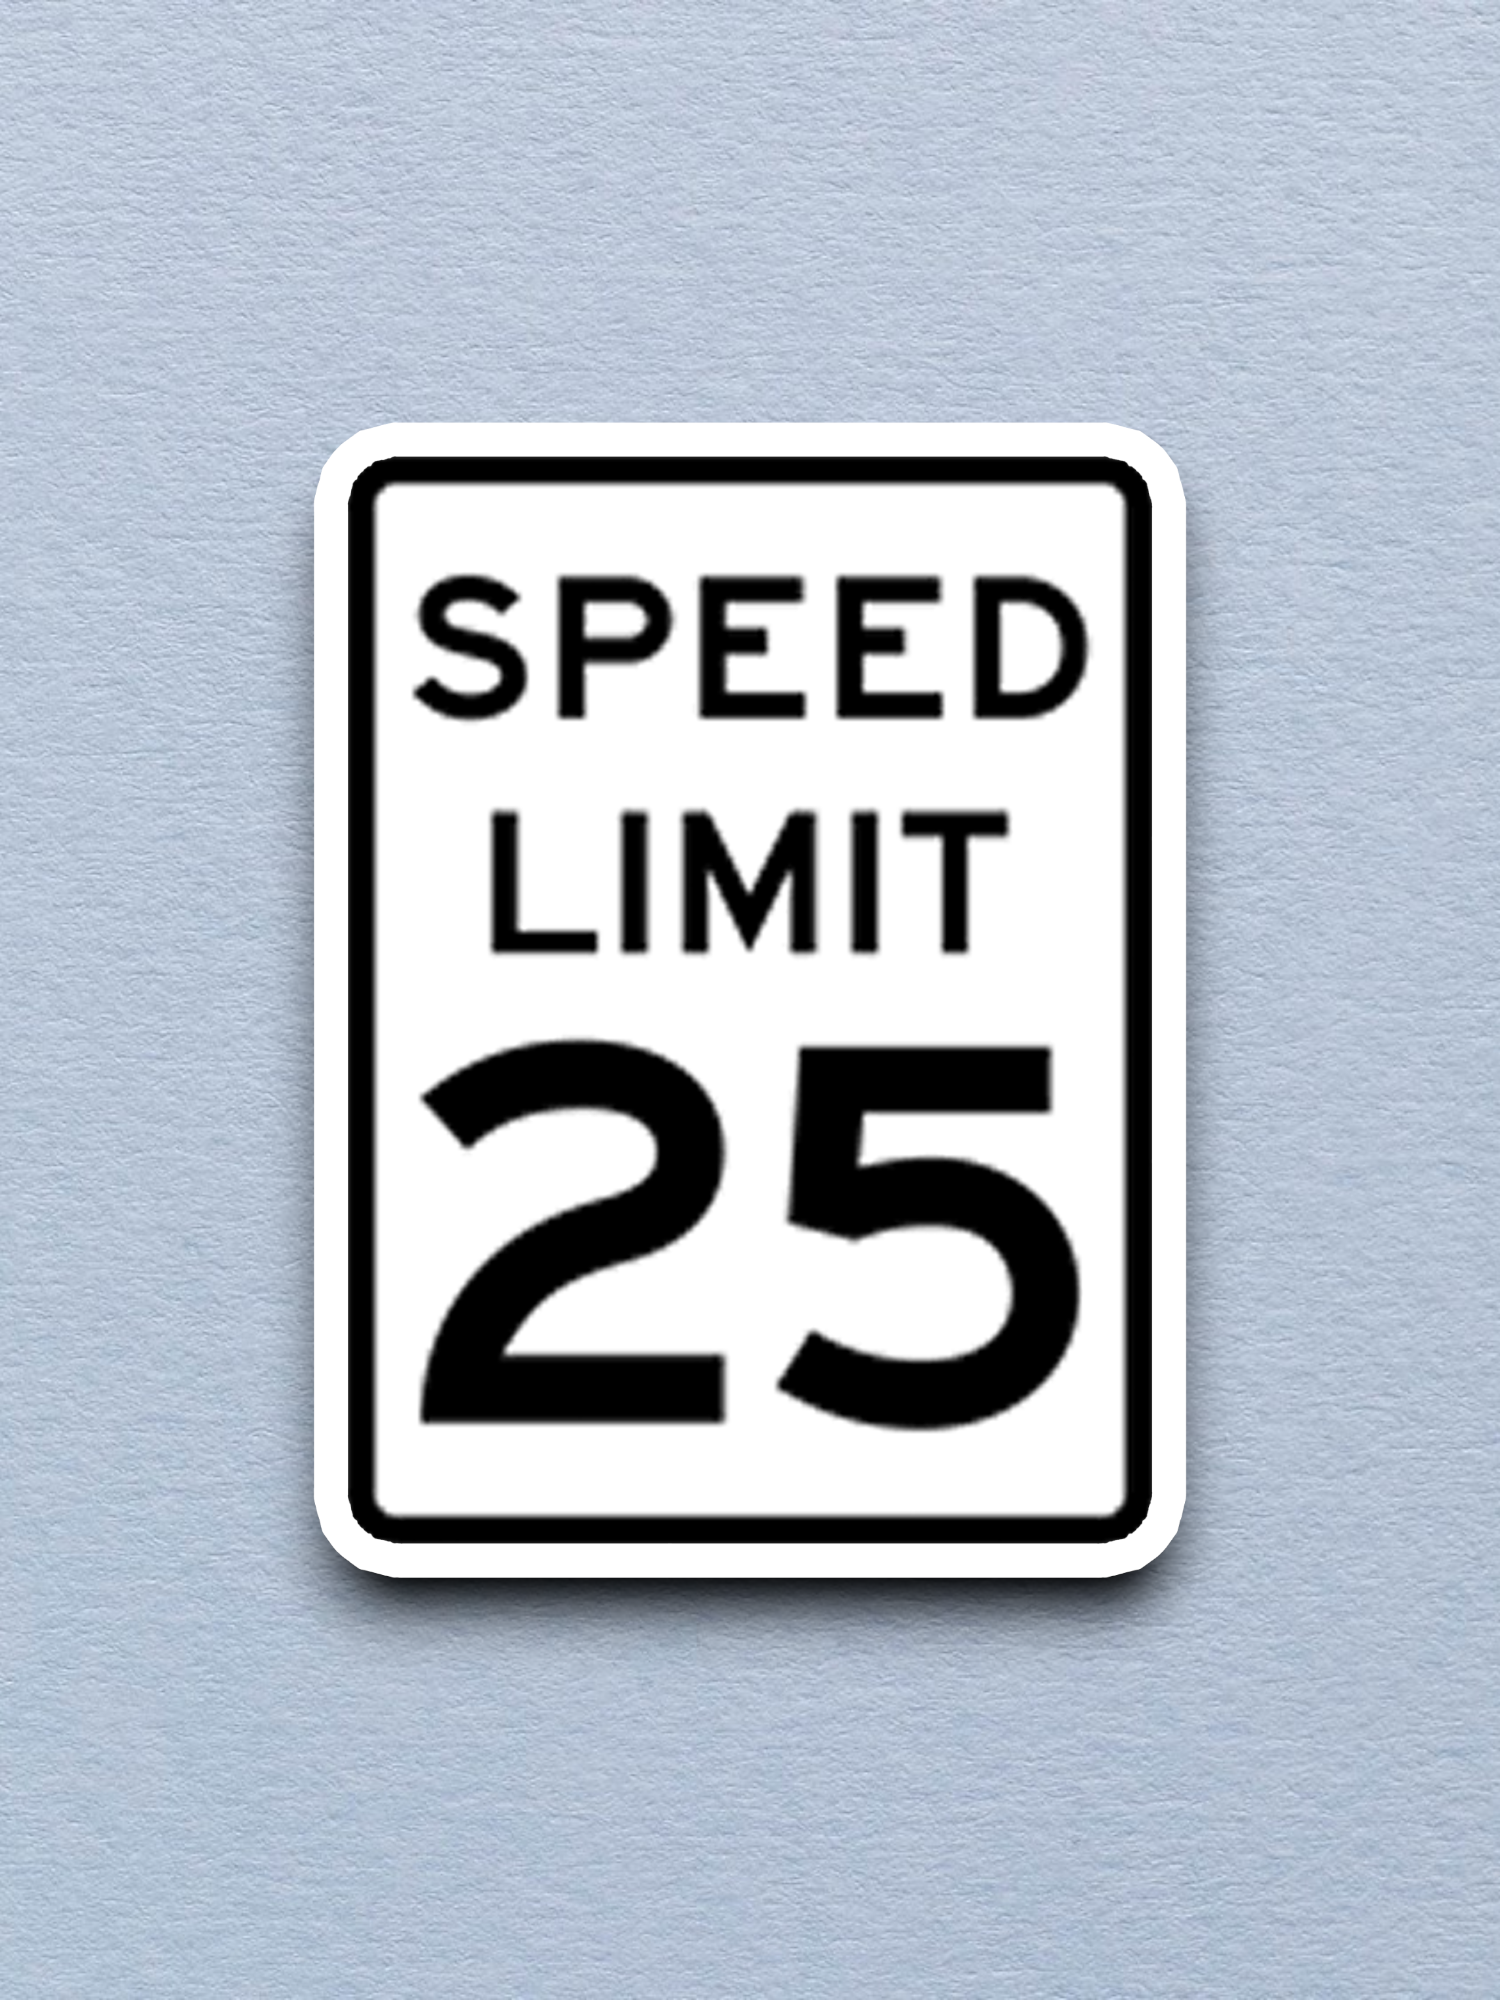 25 Miles Per Hour Speed Limit Road Sign Sticker